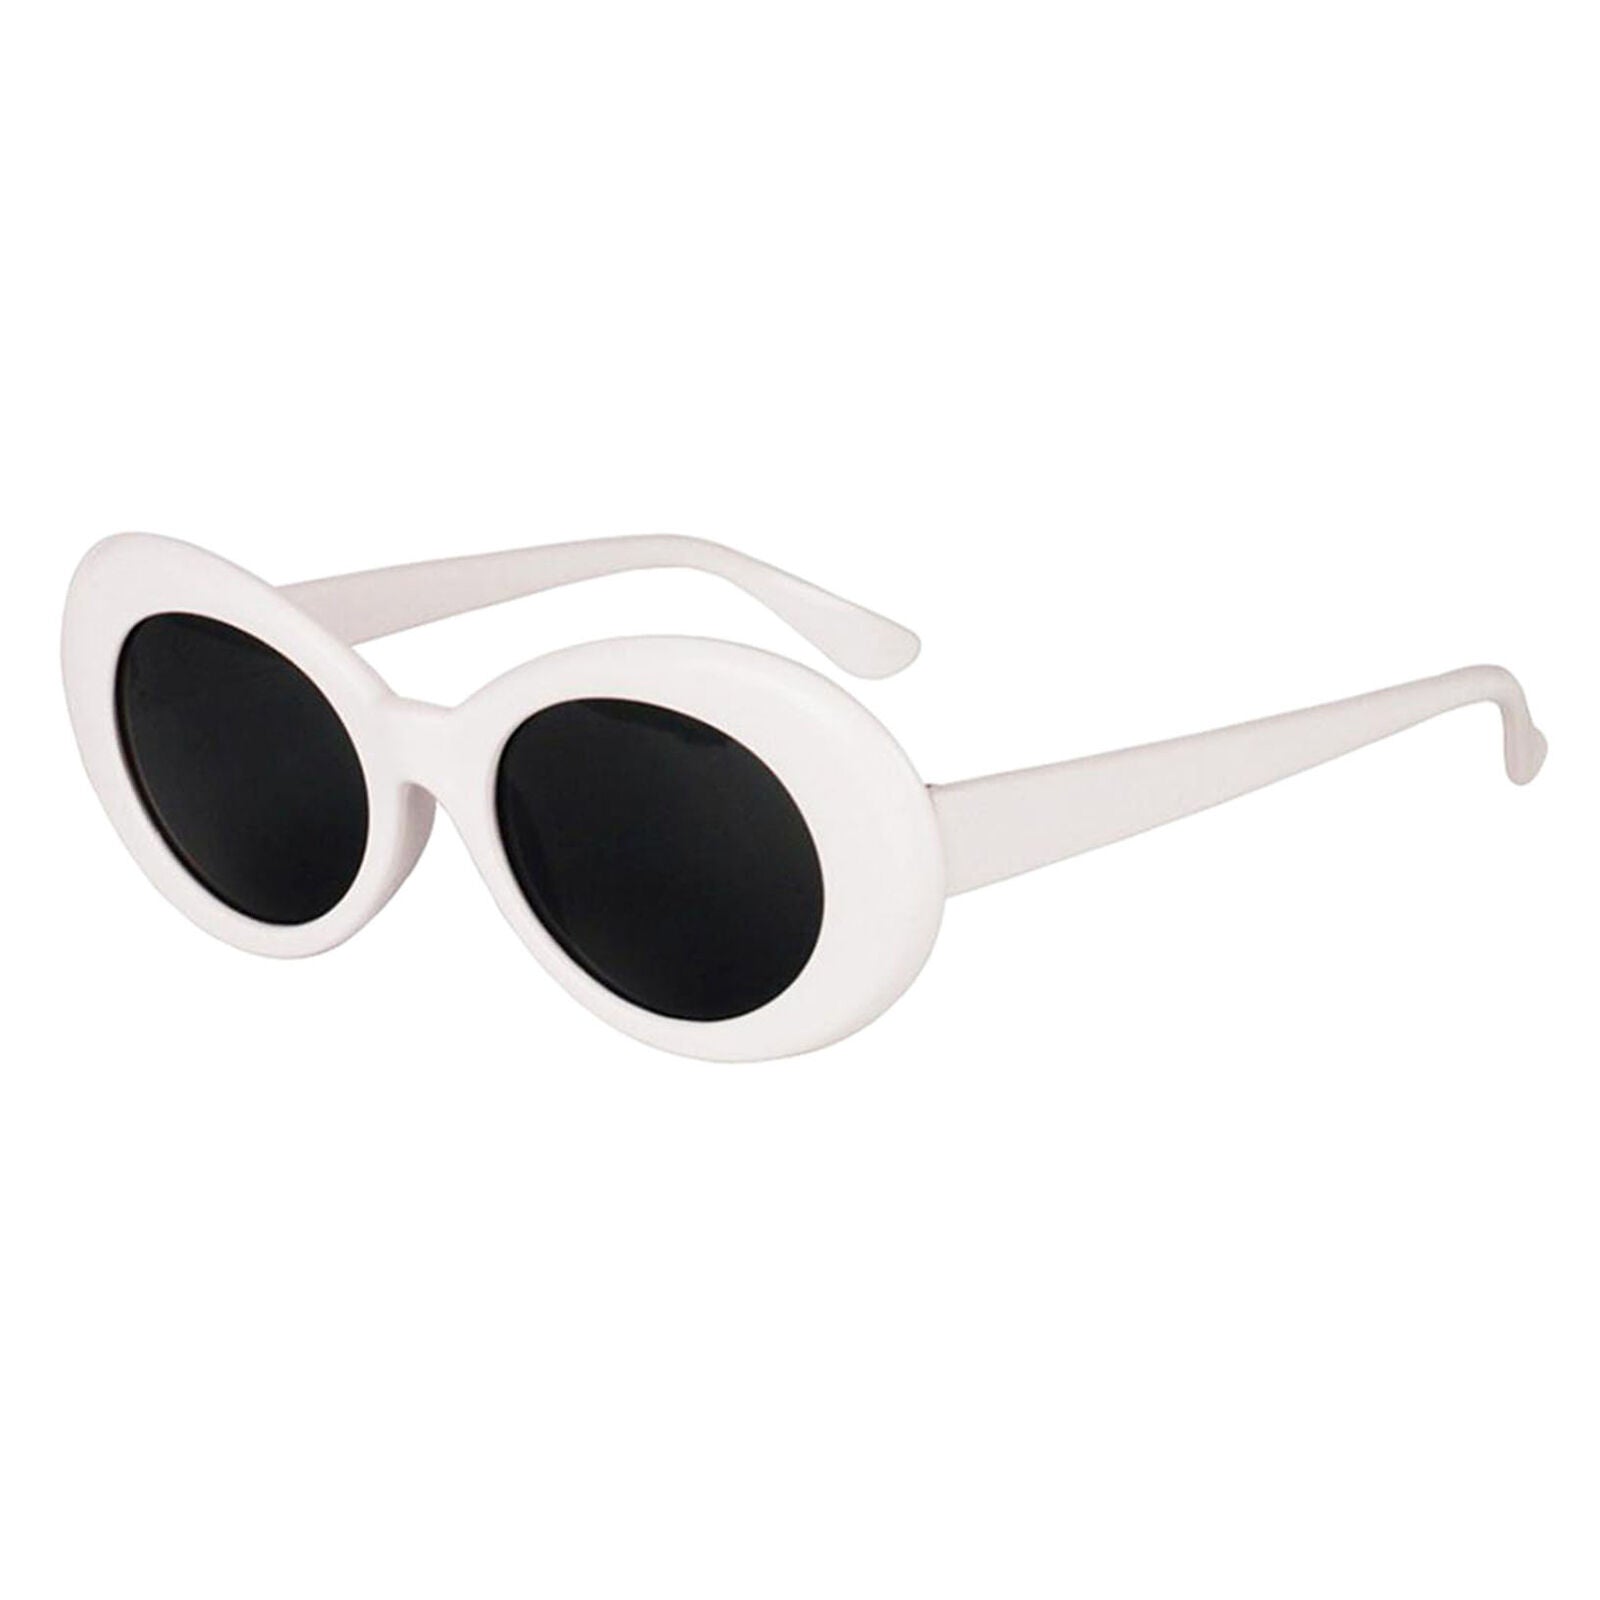 Clout Goggles Glasses Mod Thick Framed Sunglasses Unisex